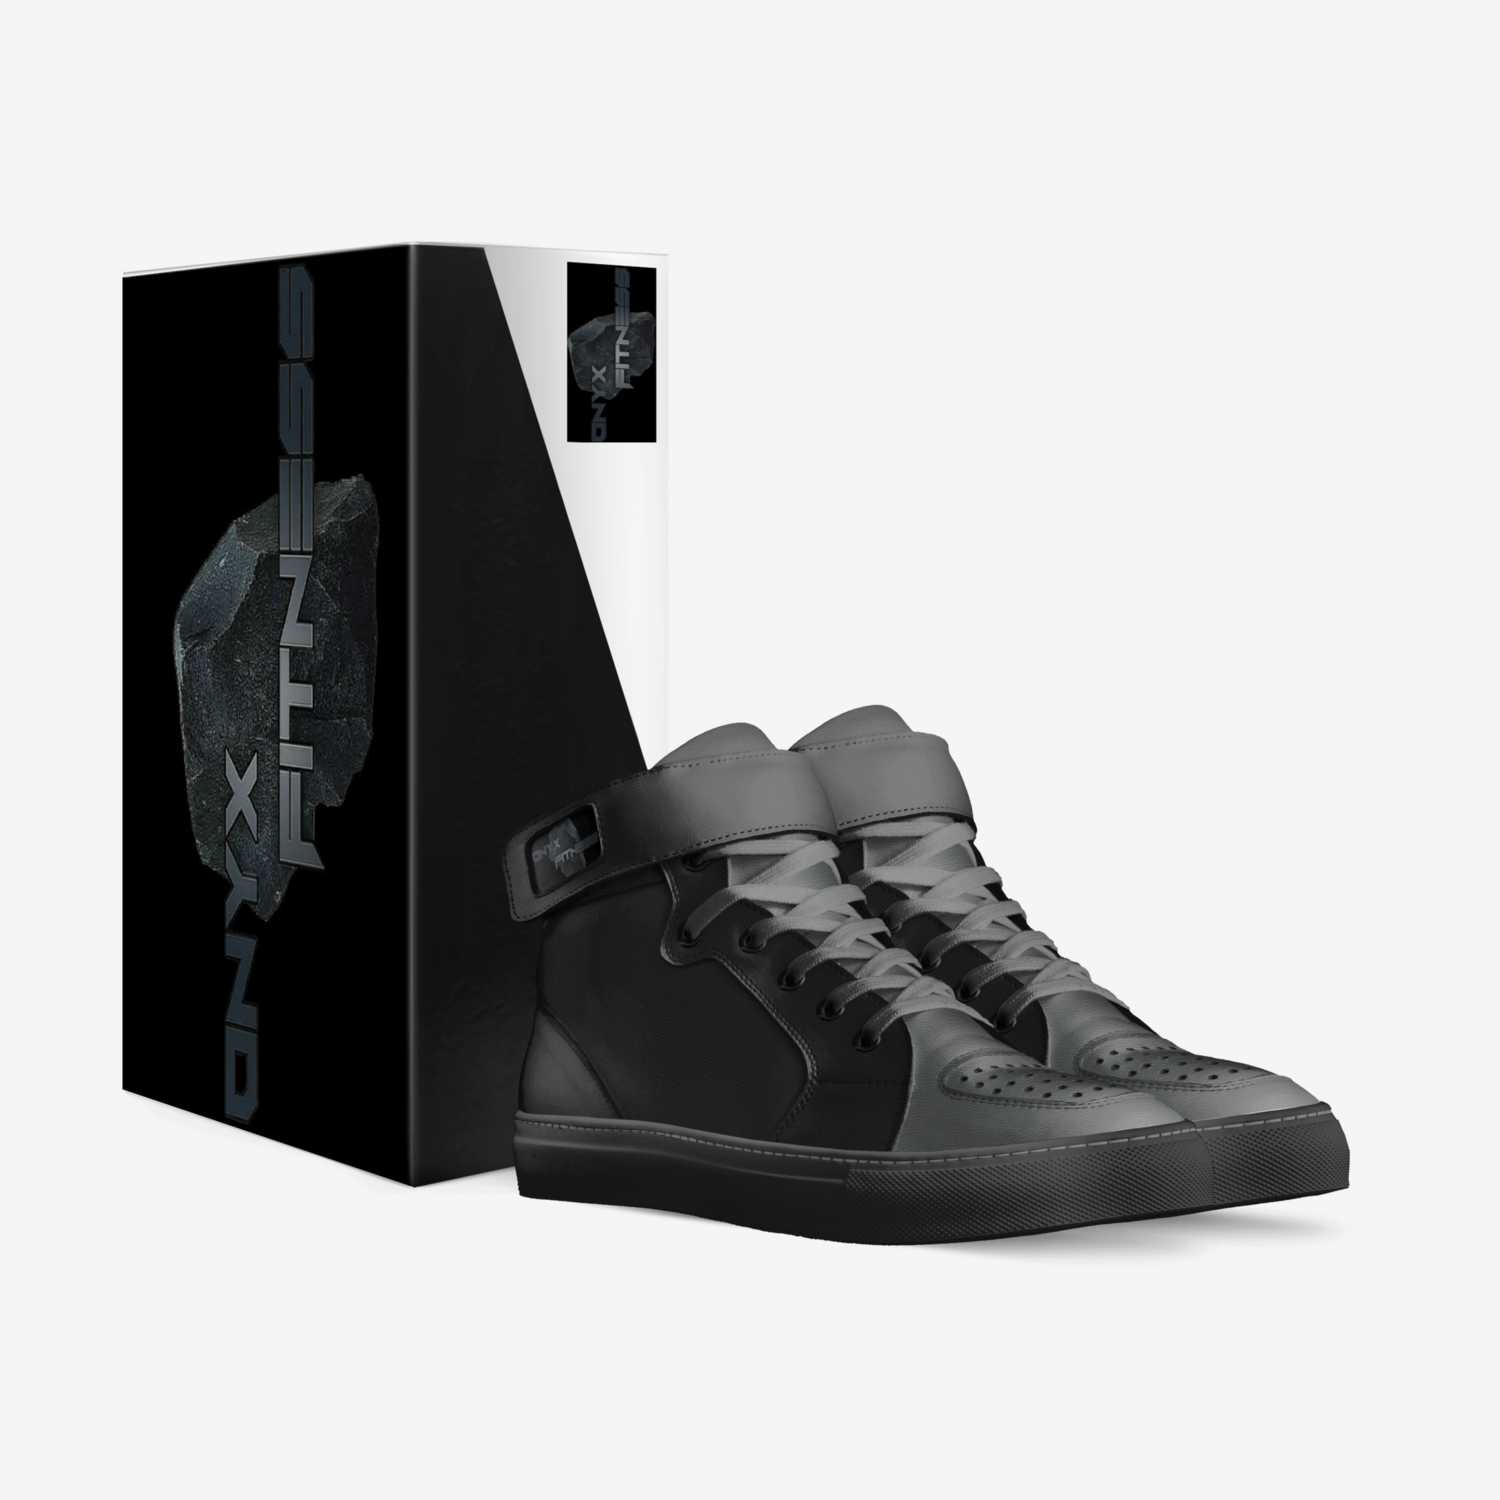 Blk R0ks custom made in Italy shoes by 0nyx Fitness | Box view